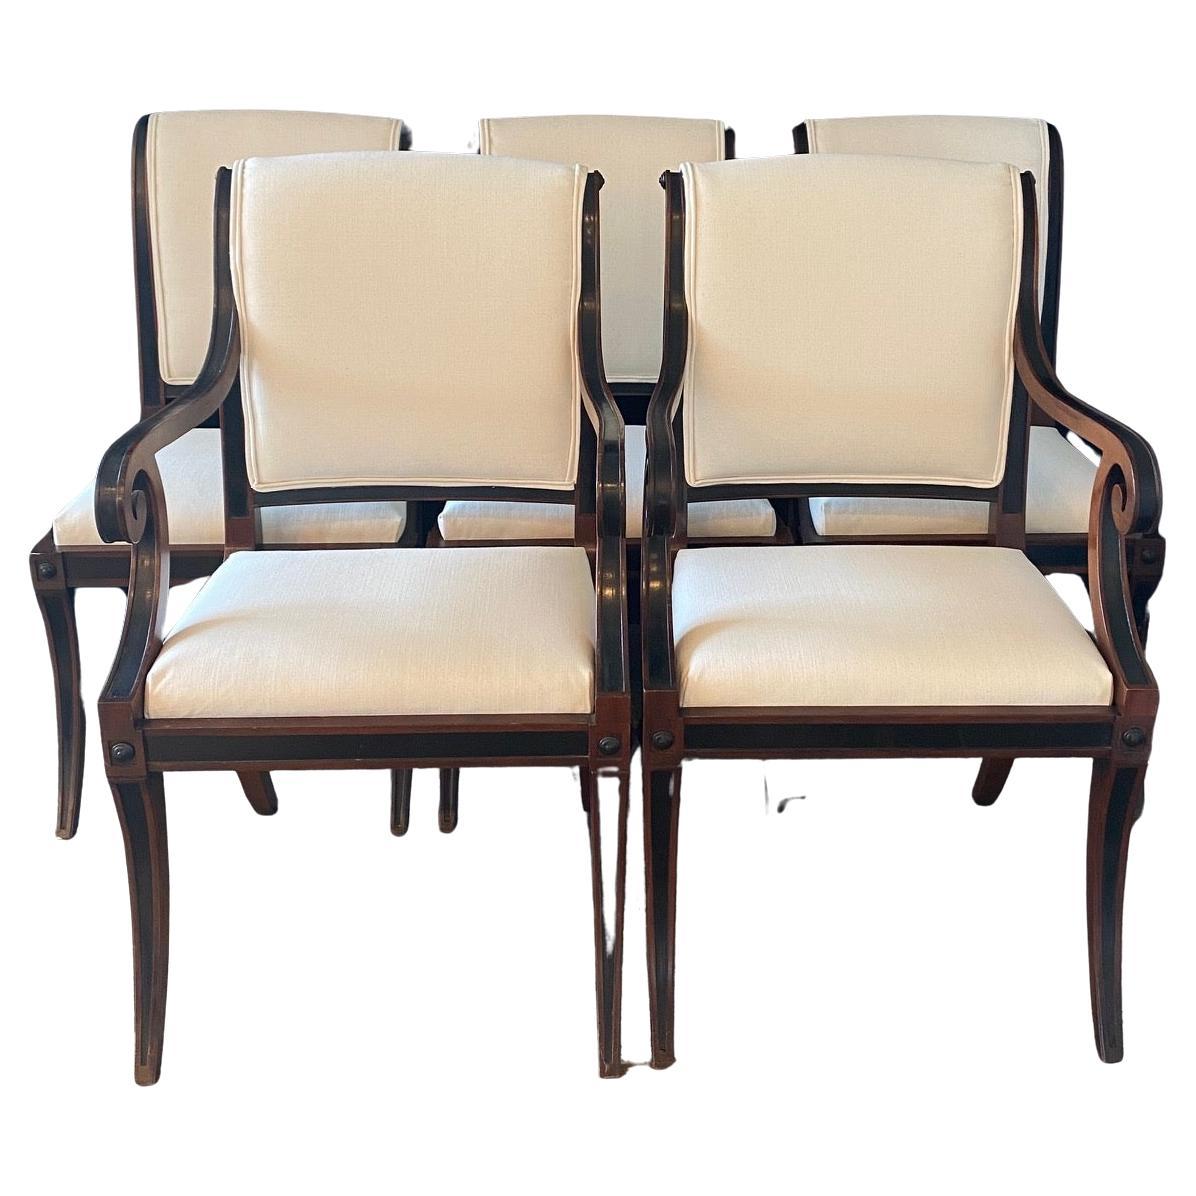 Set of Five Klismos Ebony and Mahogany Neoclassical Dining Chairs